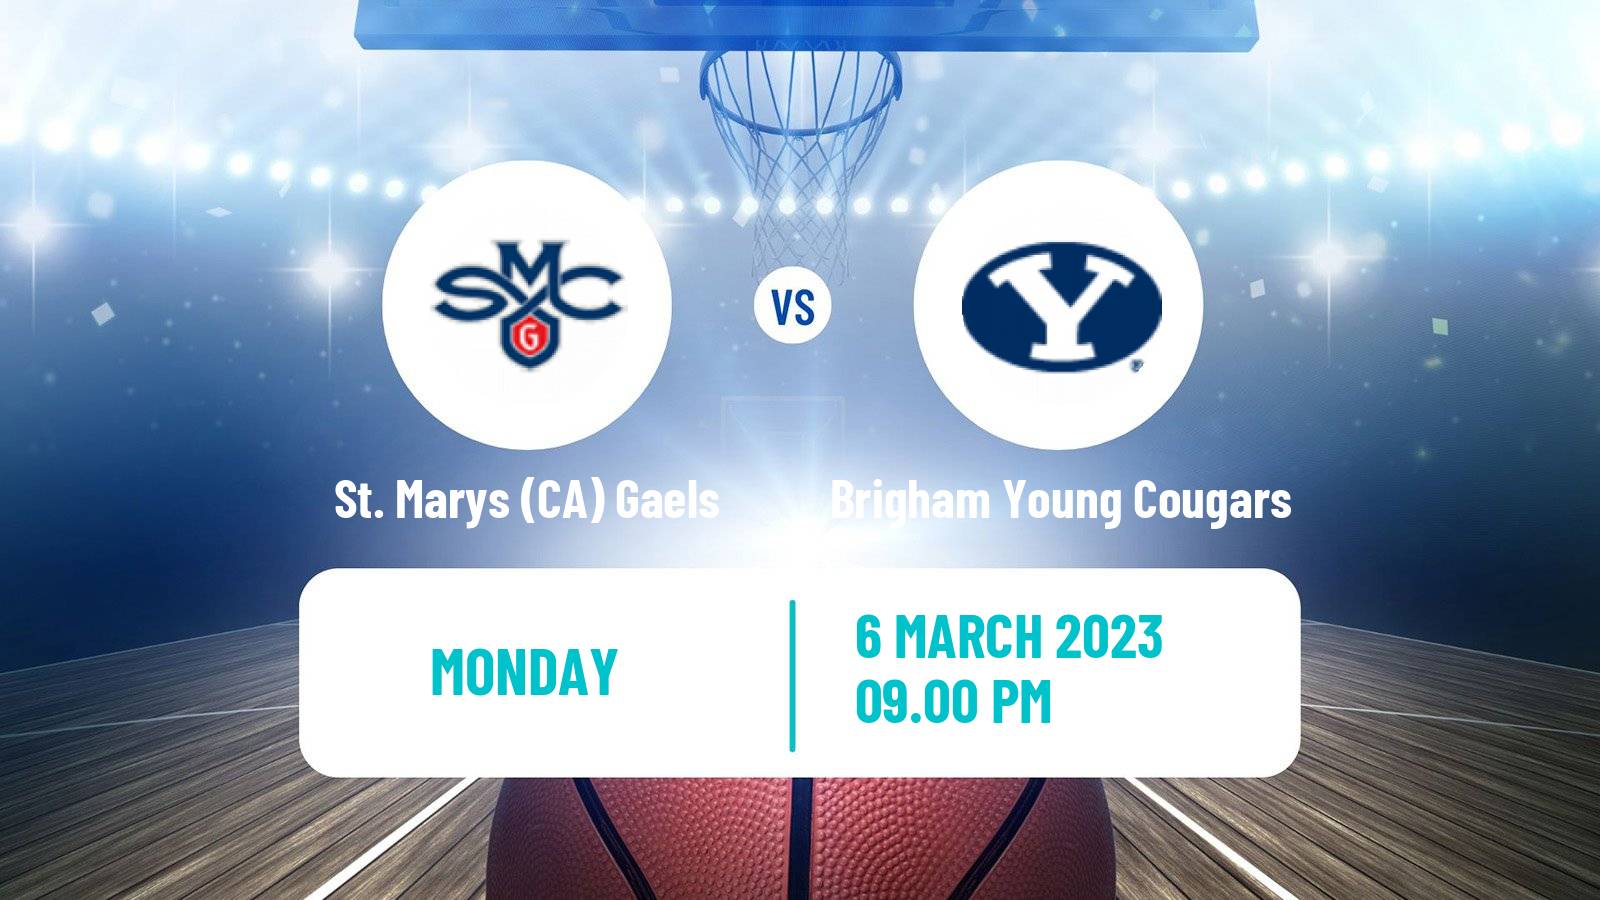 Basketball NCAA College Basketball St. Marys (CA) Gaels - Brigham Young Cougars